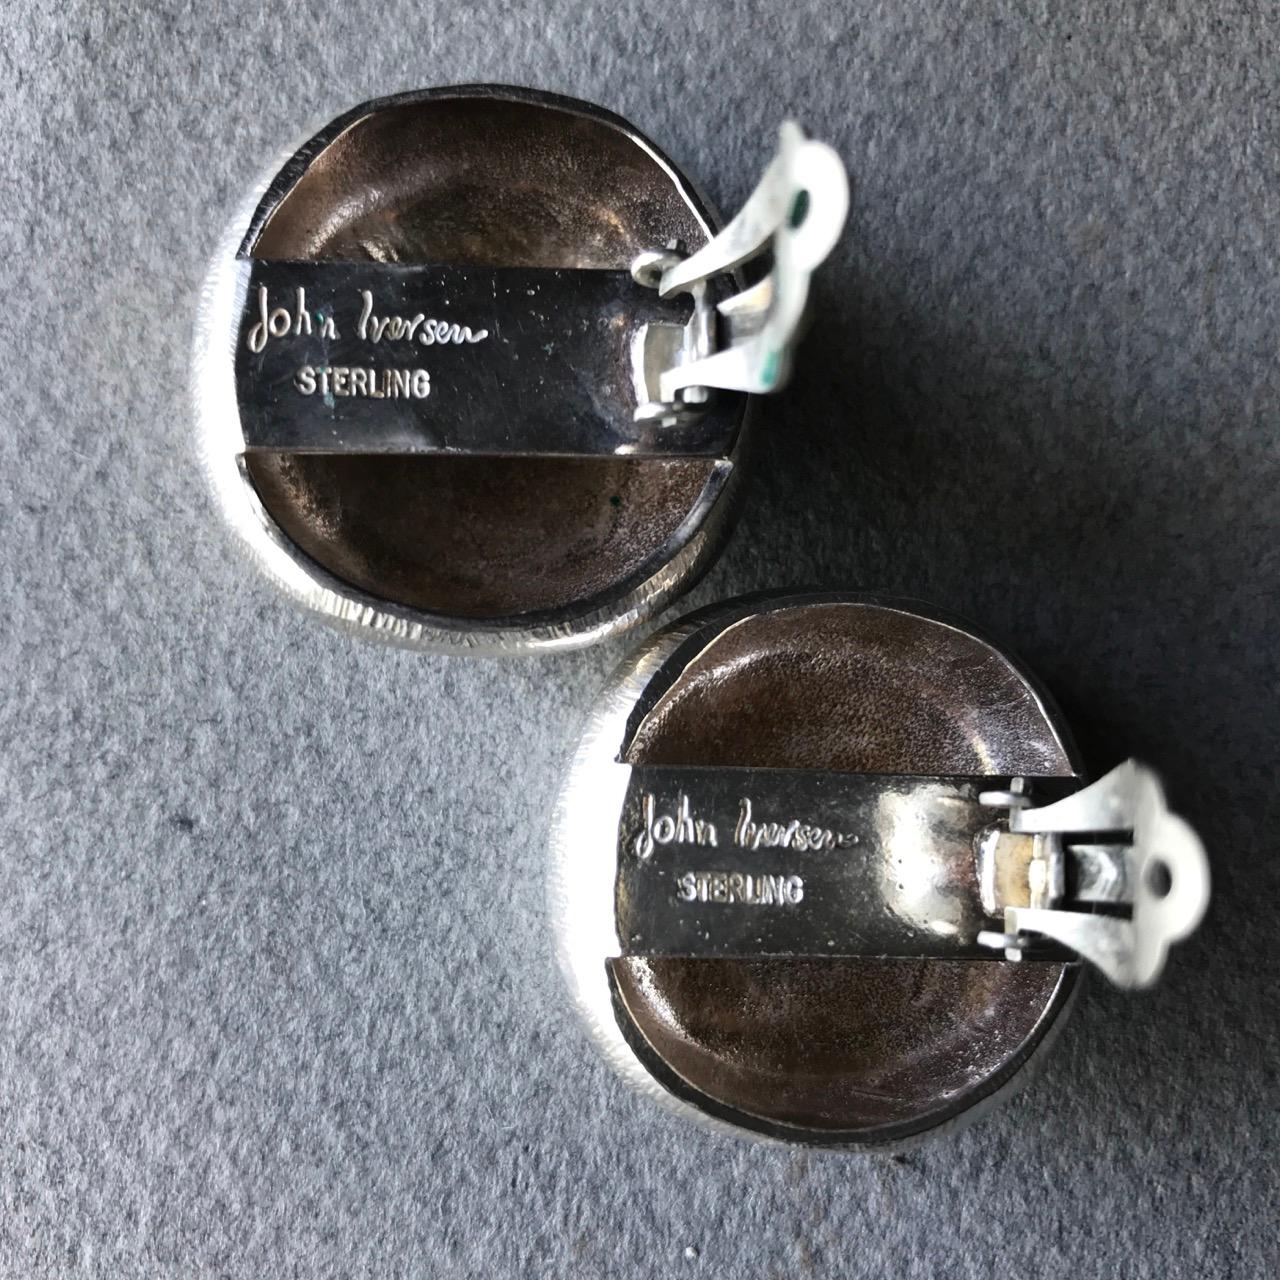 John Iversen Sterling Silver Pebble Earrings In Good Condition For Sale In San Francisco, CA